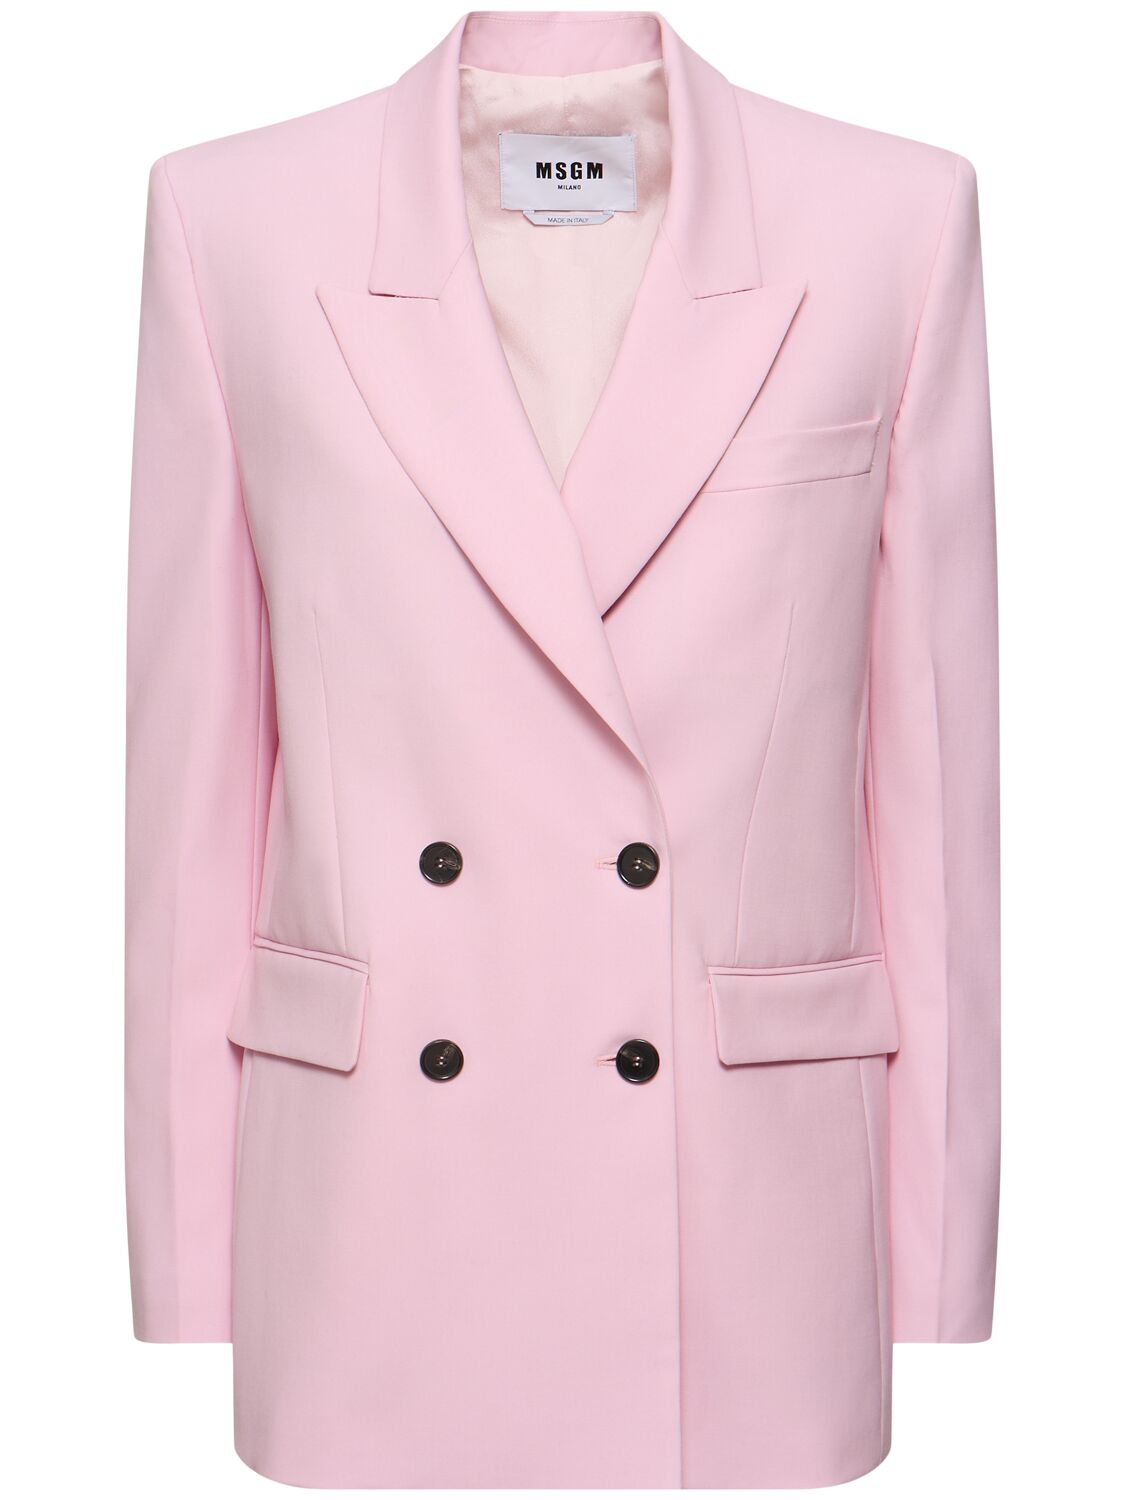 Msgm Tailored Stretch Wool Jacket In Pink